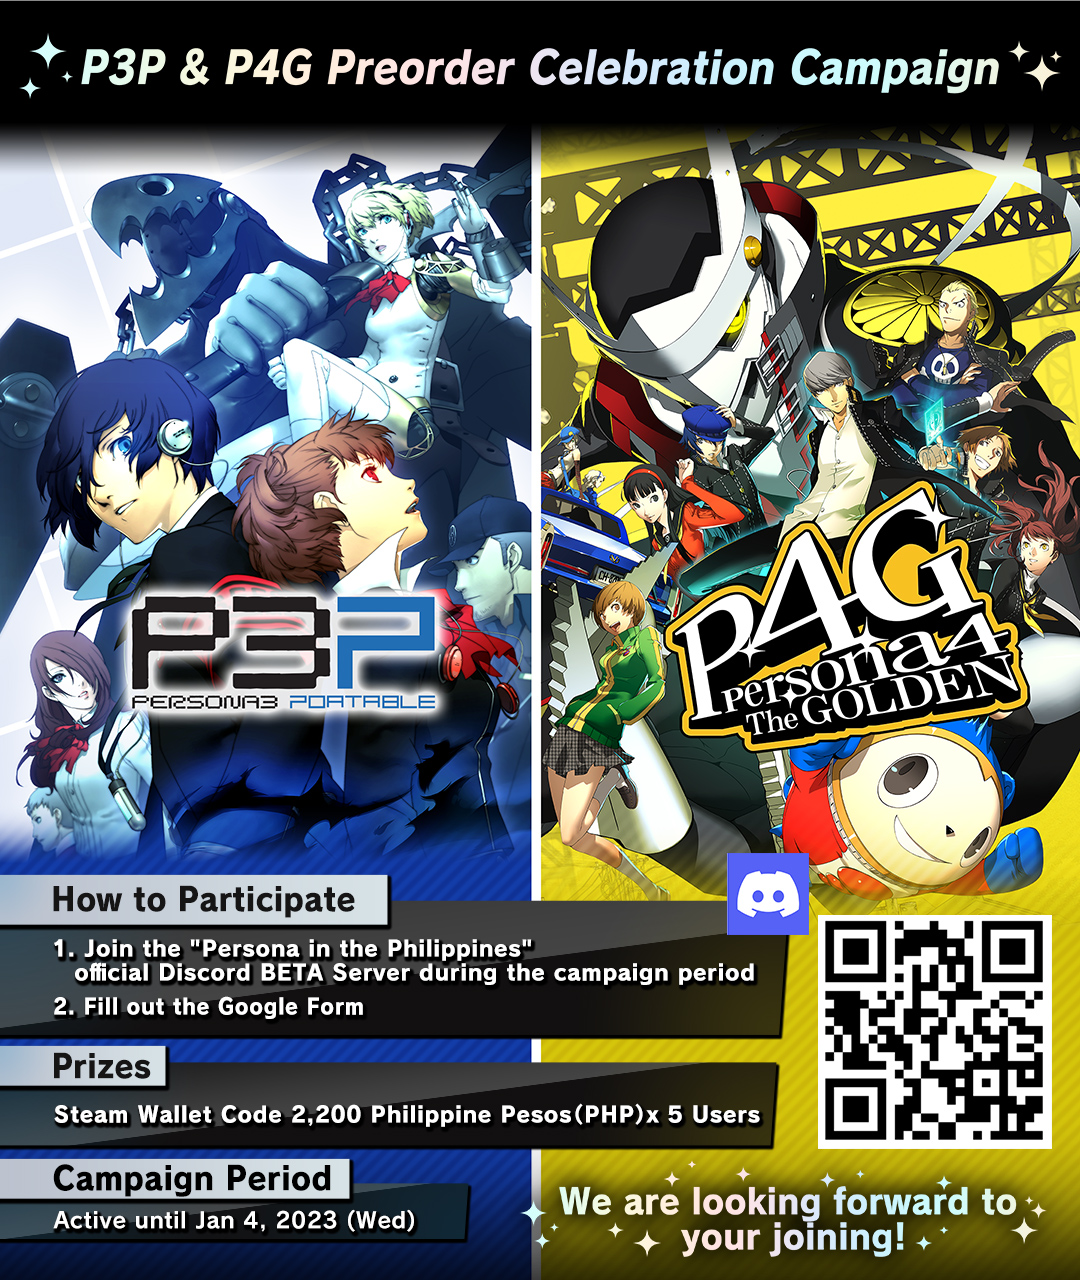 The P3P & P4G Preorder Celebration Discord campaign is also currently underway